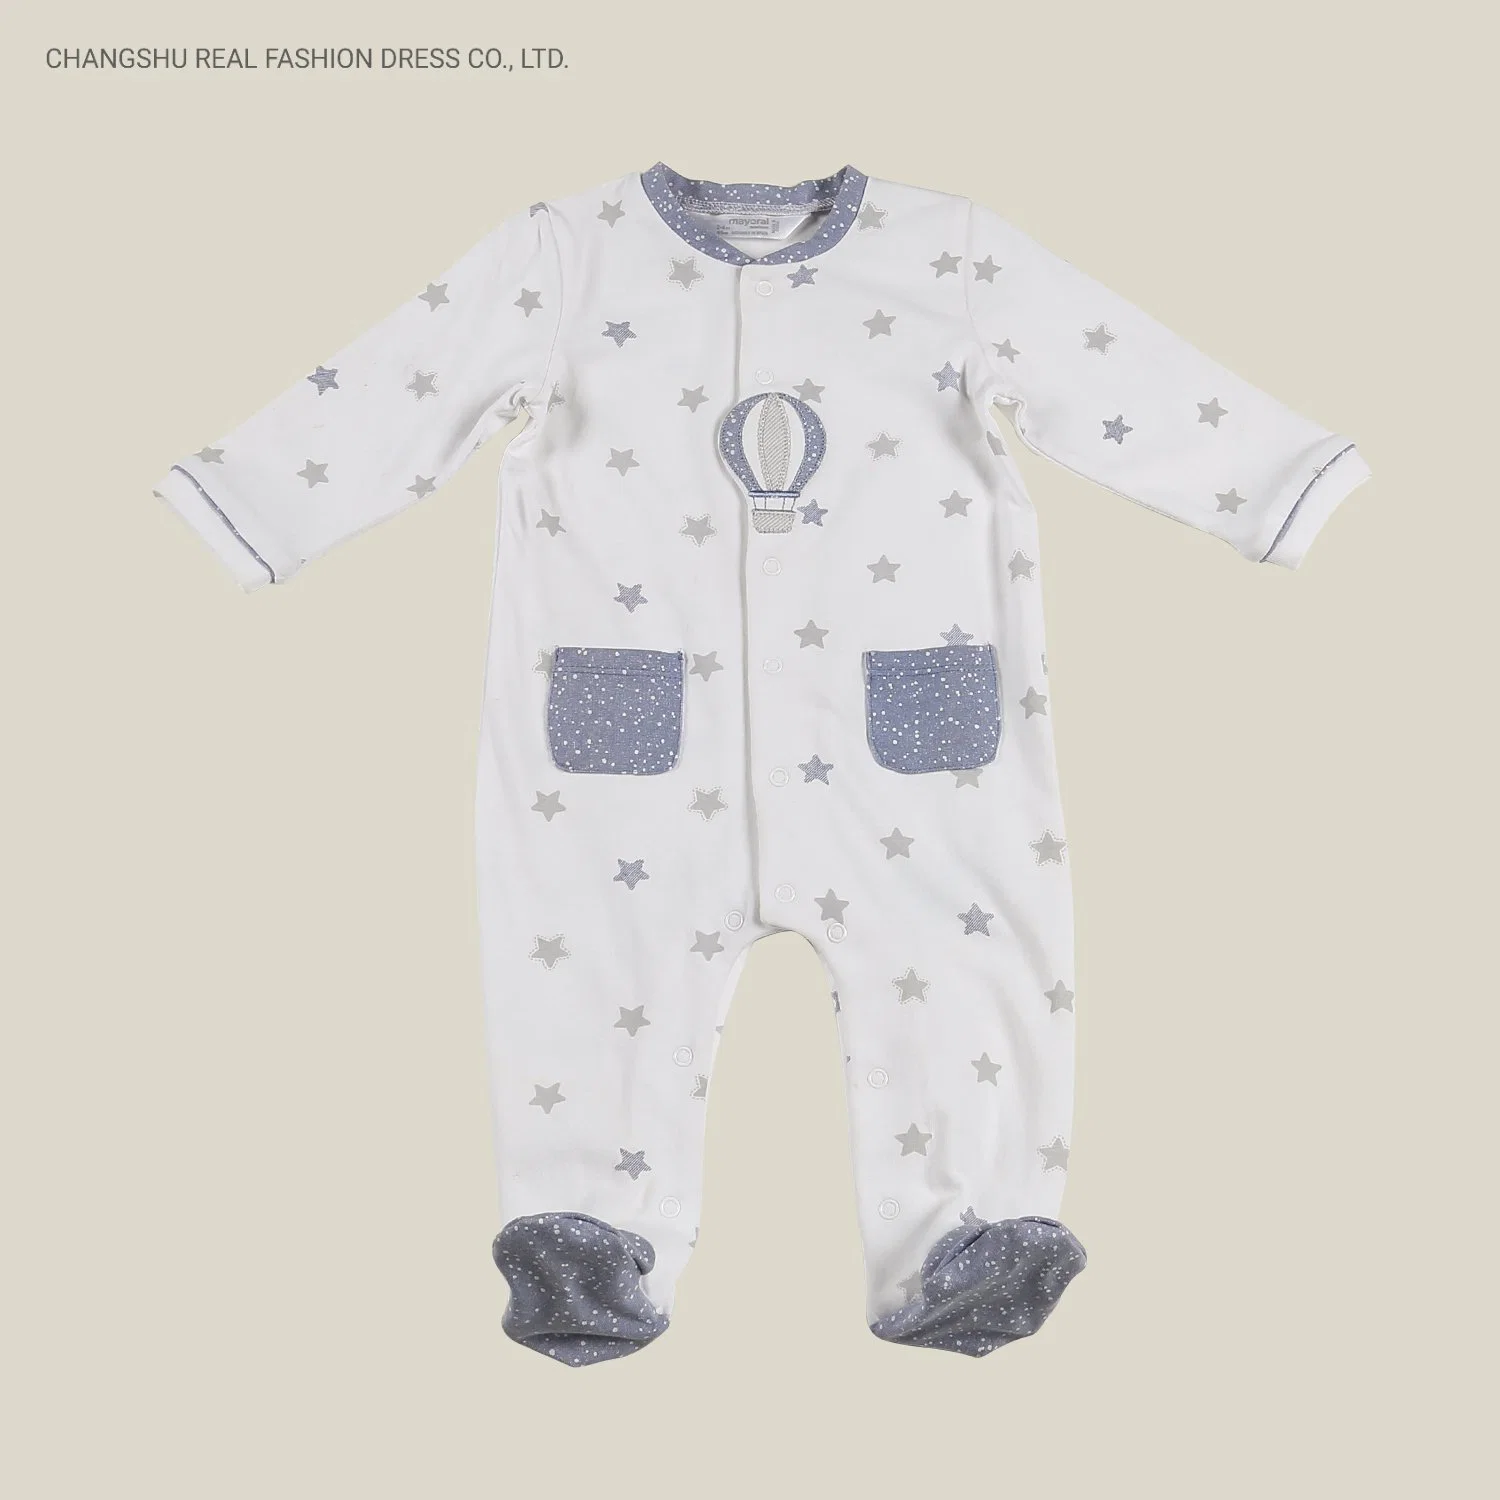 Infant Newborn Children Clothing Baby Knitted White Print Footed Coverall Romper Wear